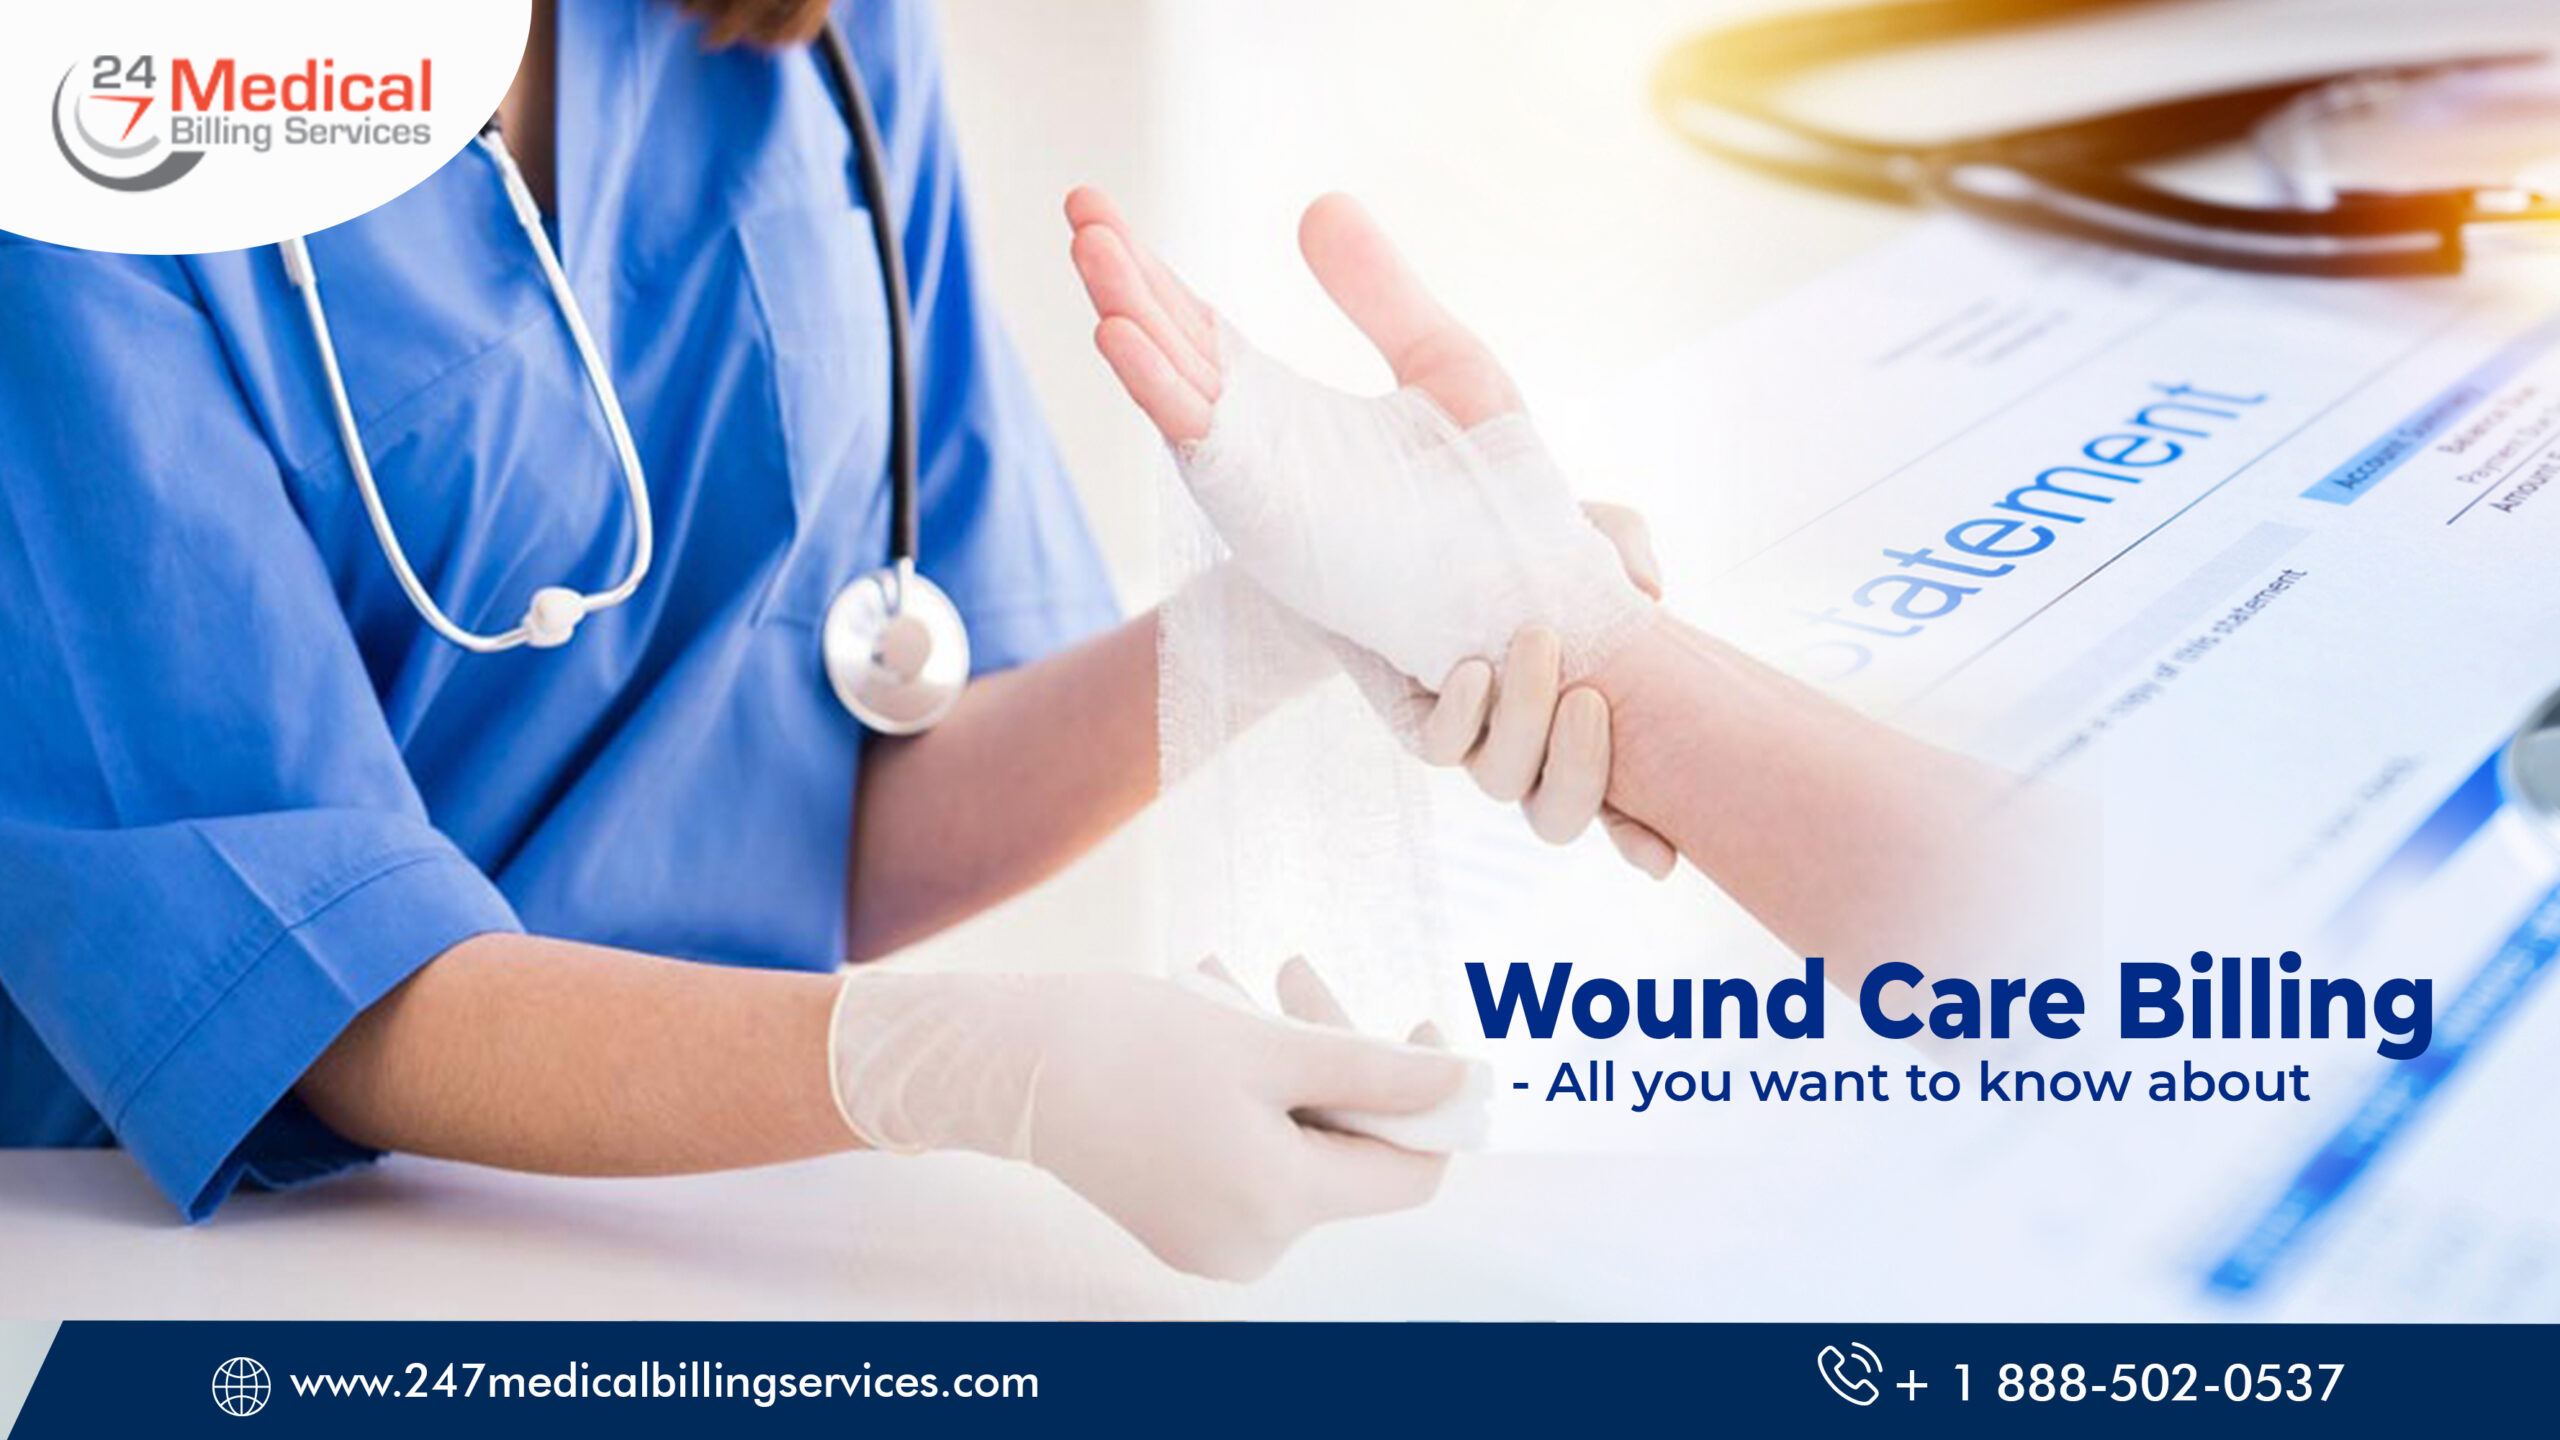  Wound Care Billing – All you want to know about!